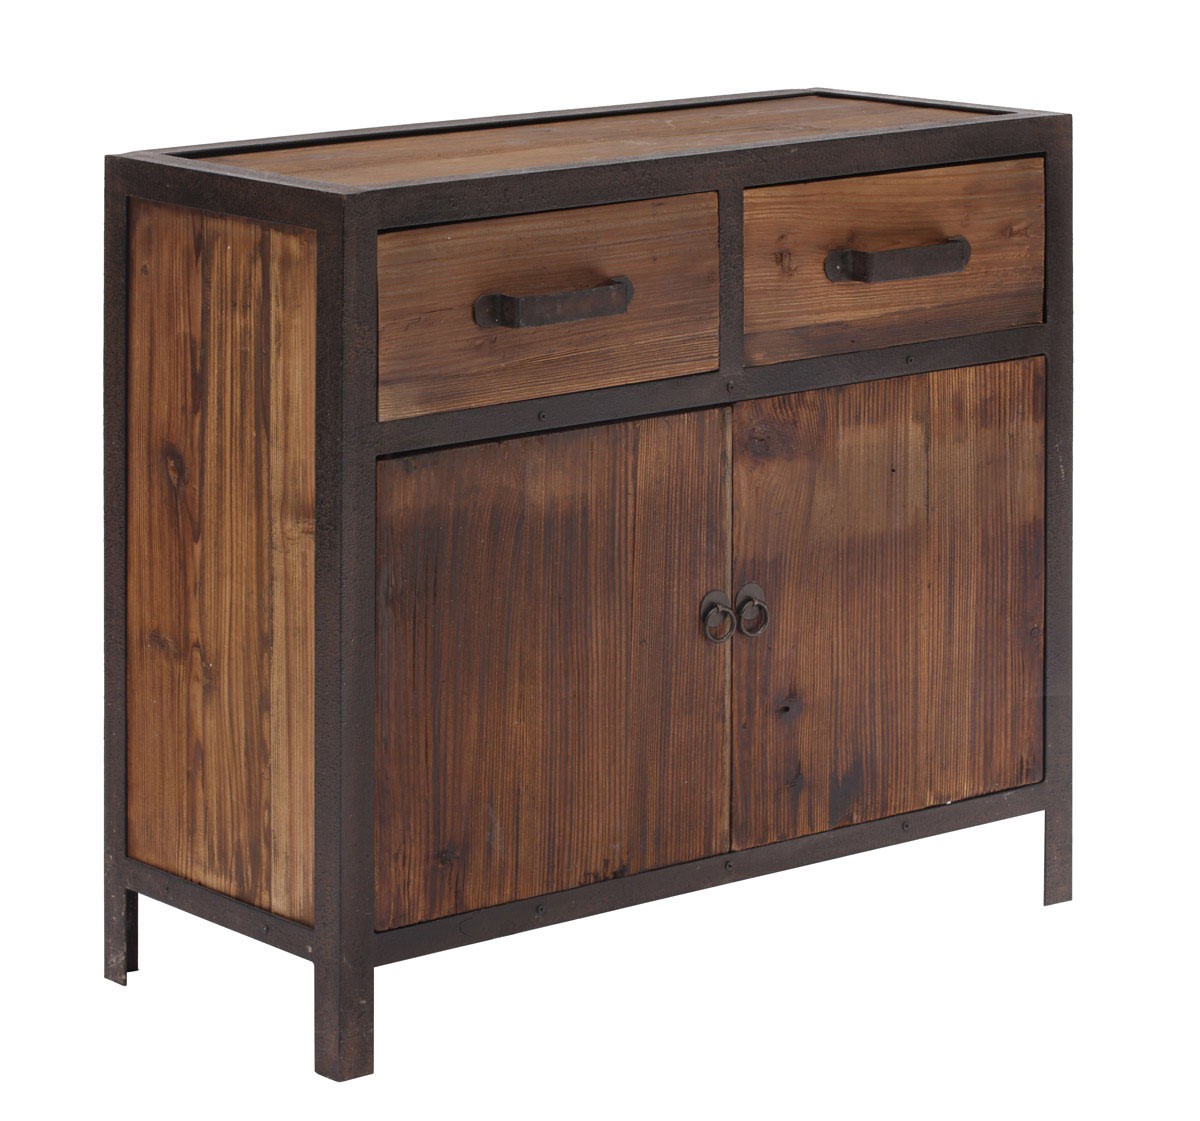 Zuo Modern Fort Mason Cabinet - Distressed Natural